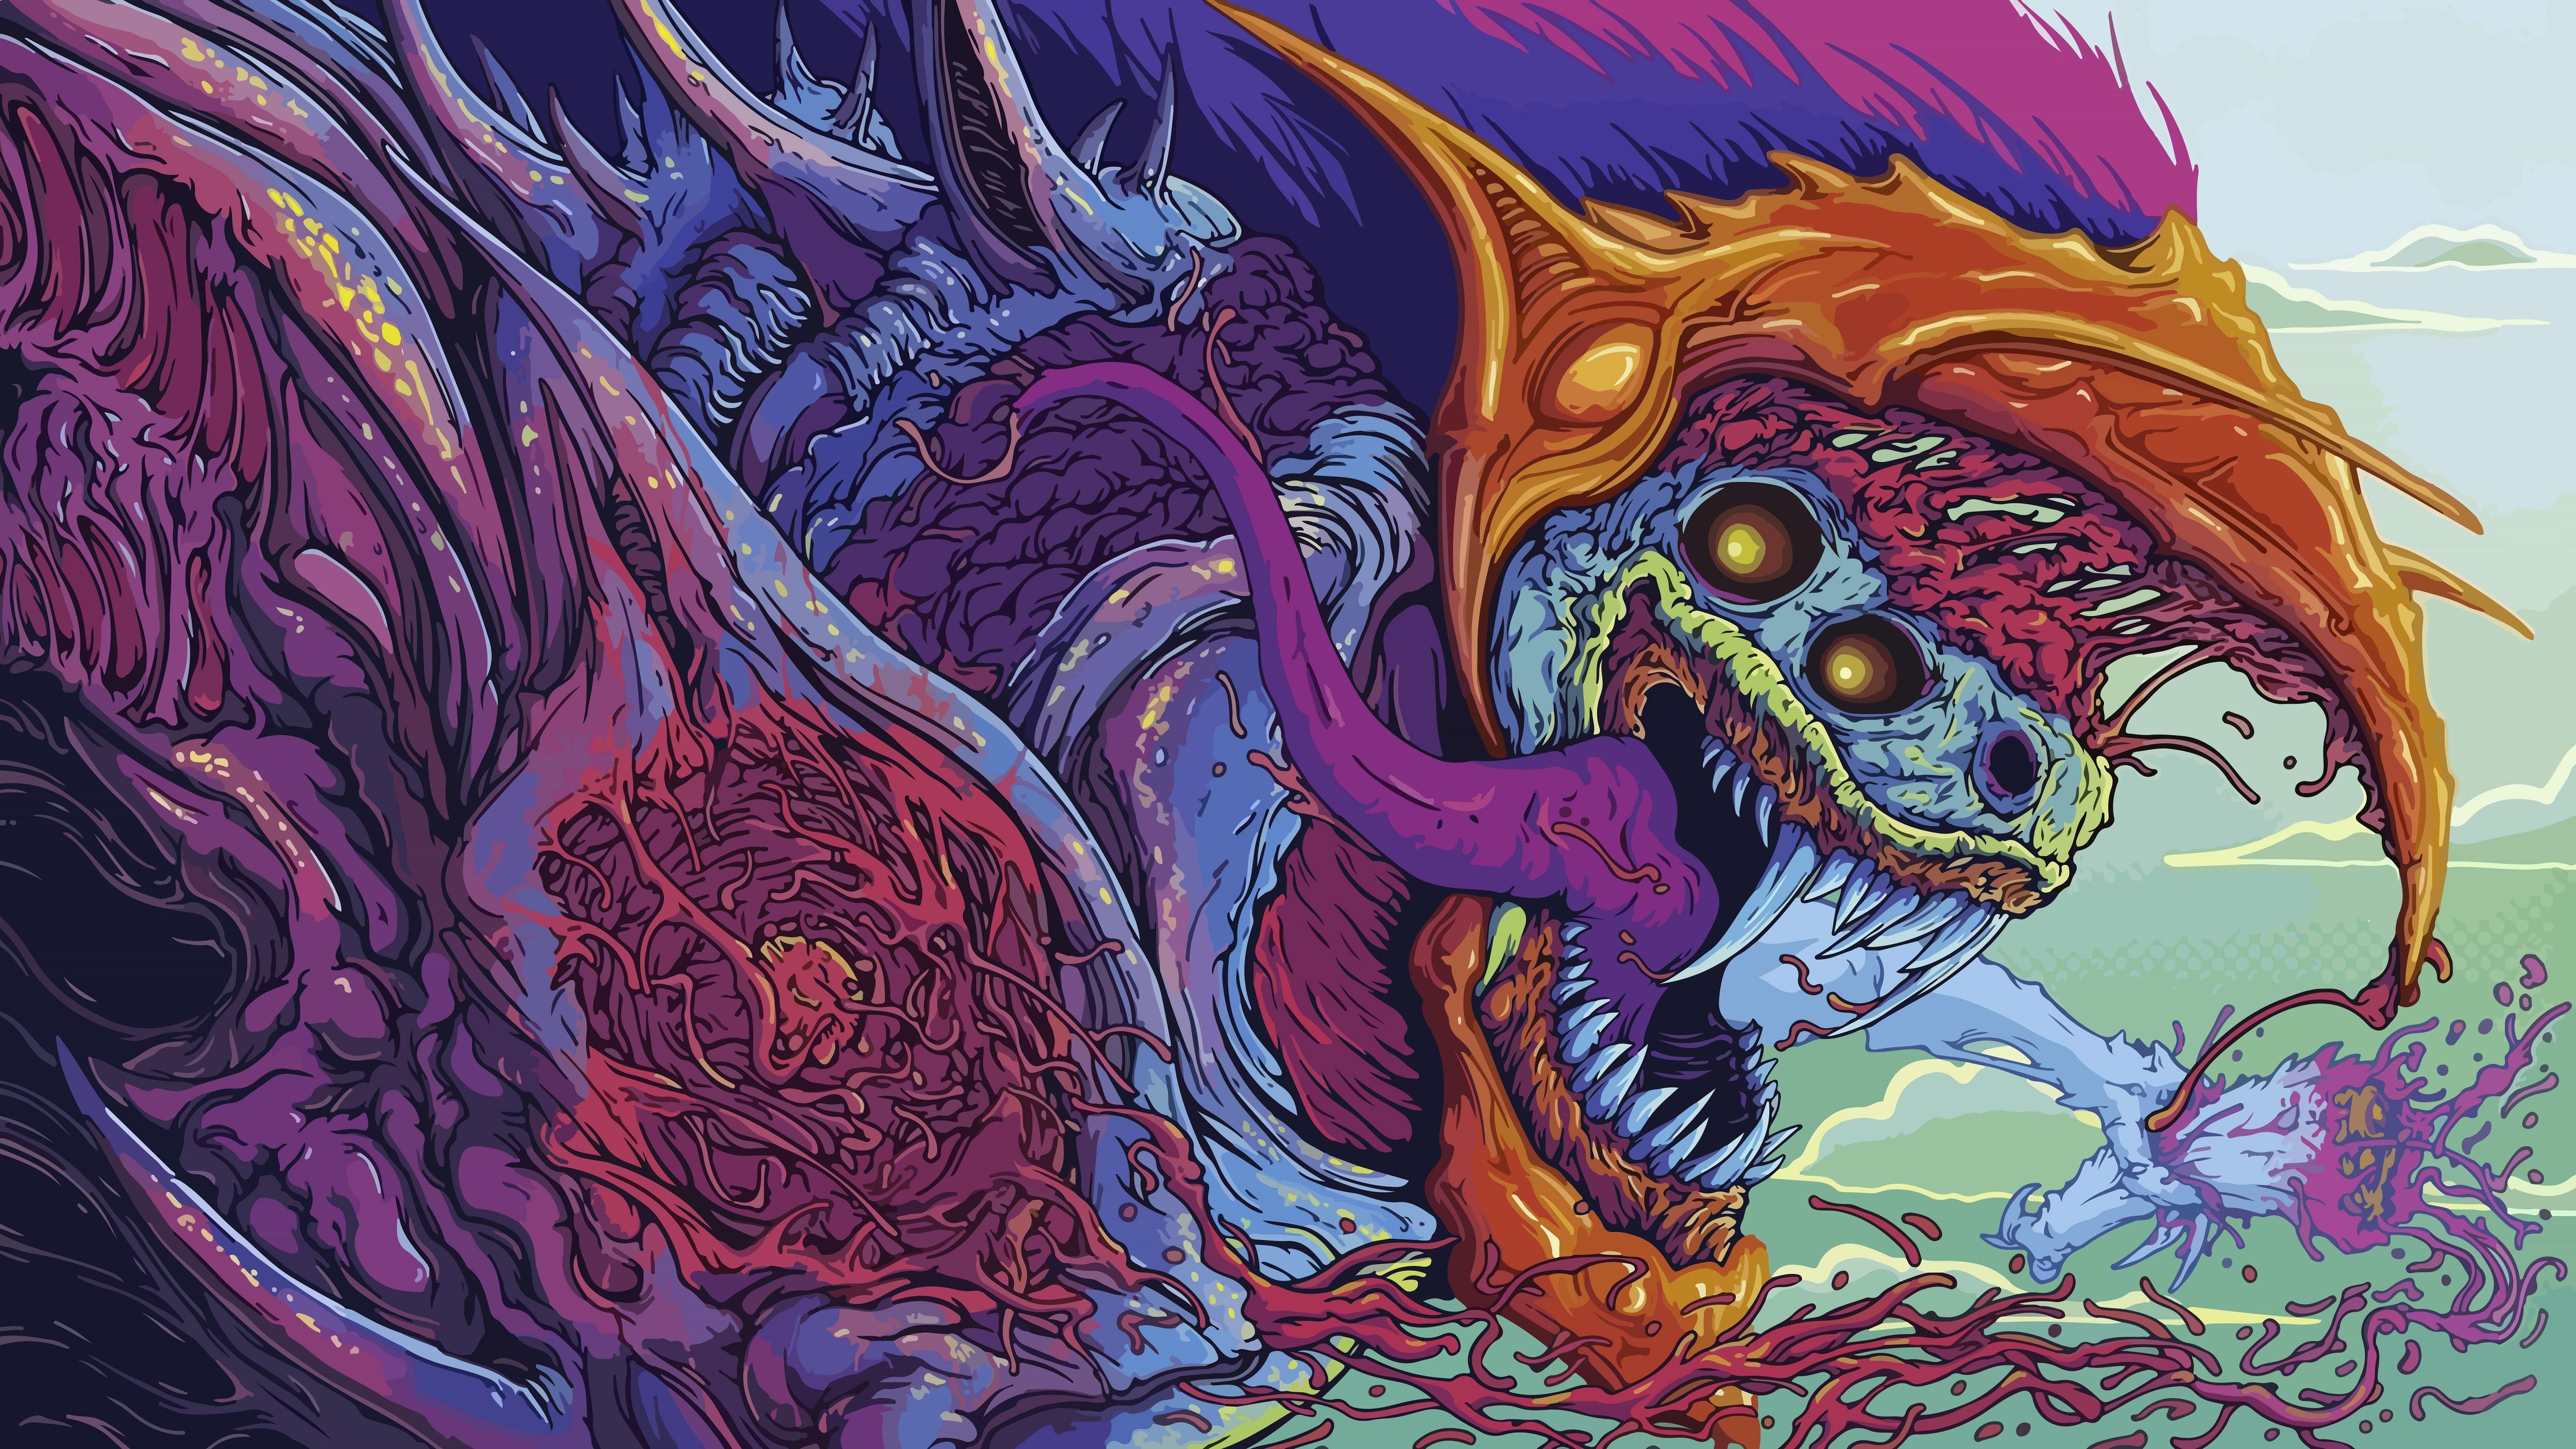 Hyper Beast (5000x2813) (Anyone know of more wallpaper like this